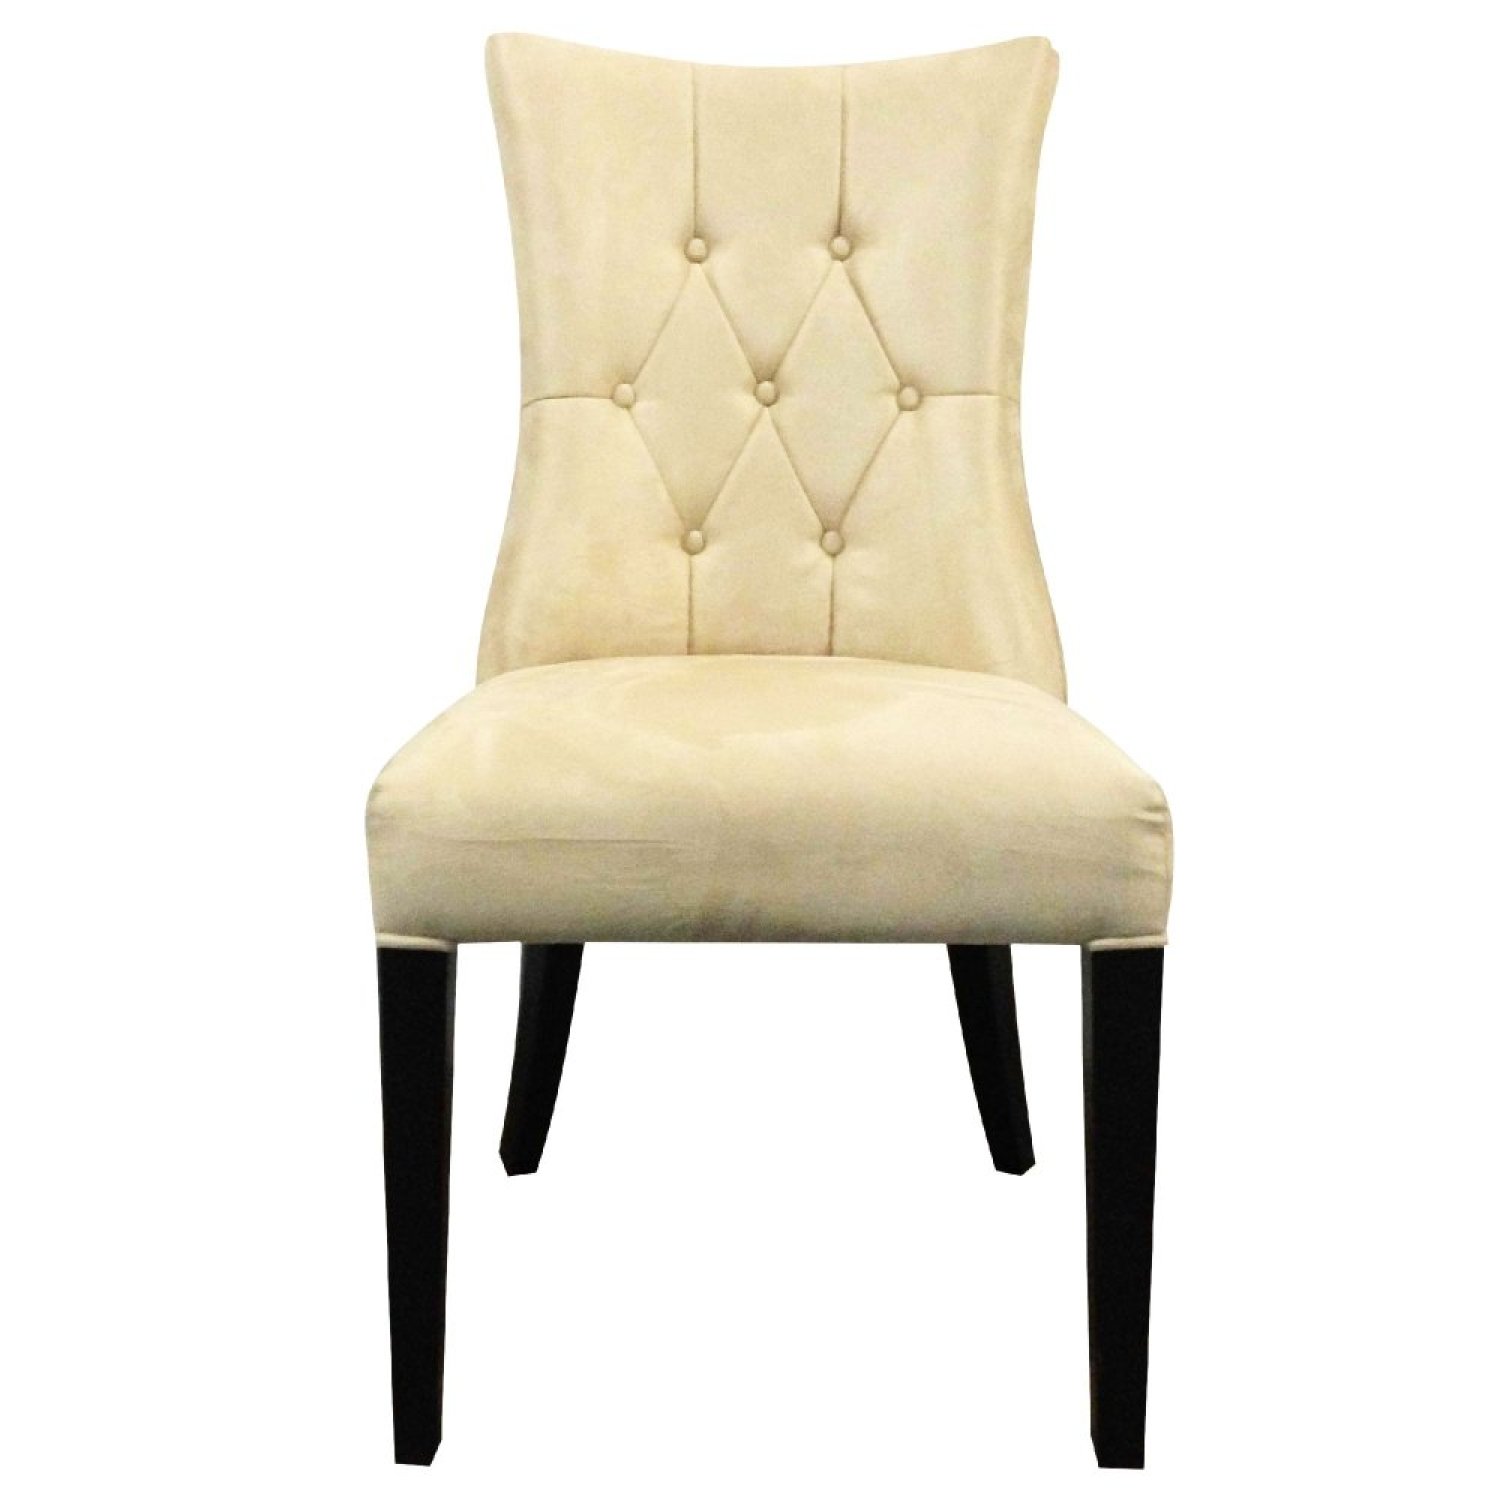 queen chair whiteblack wenge wood review and price